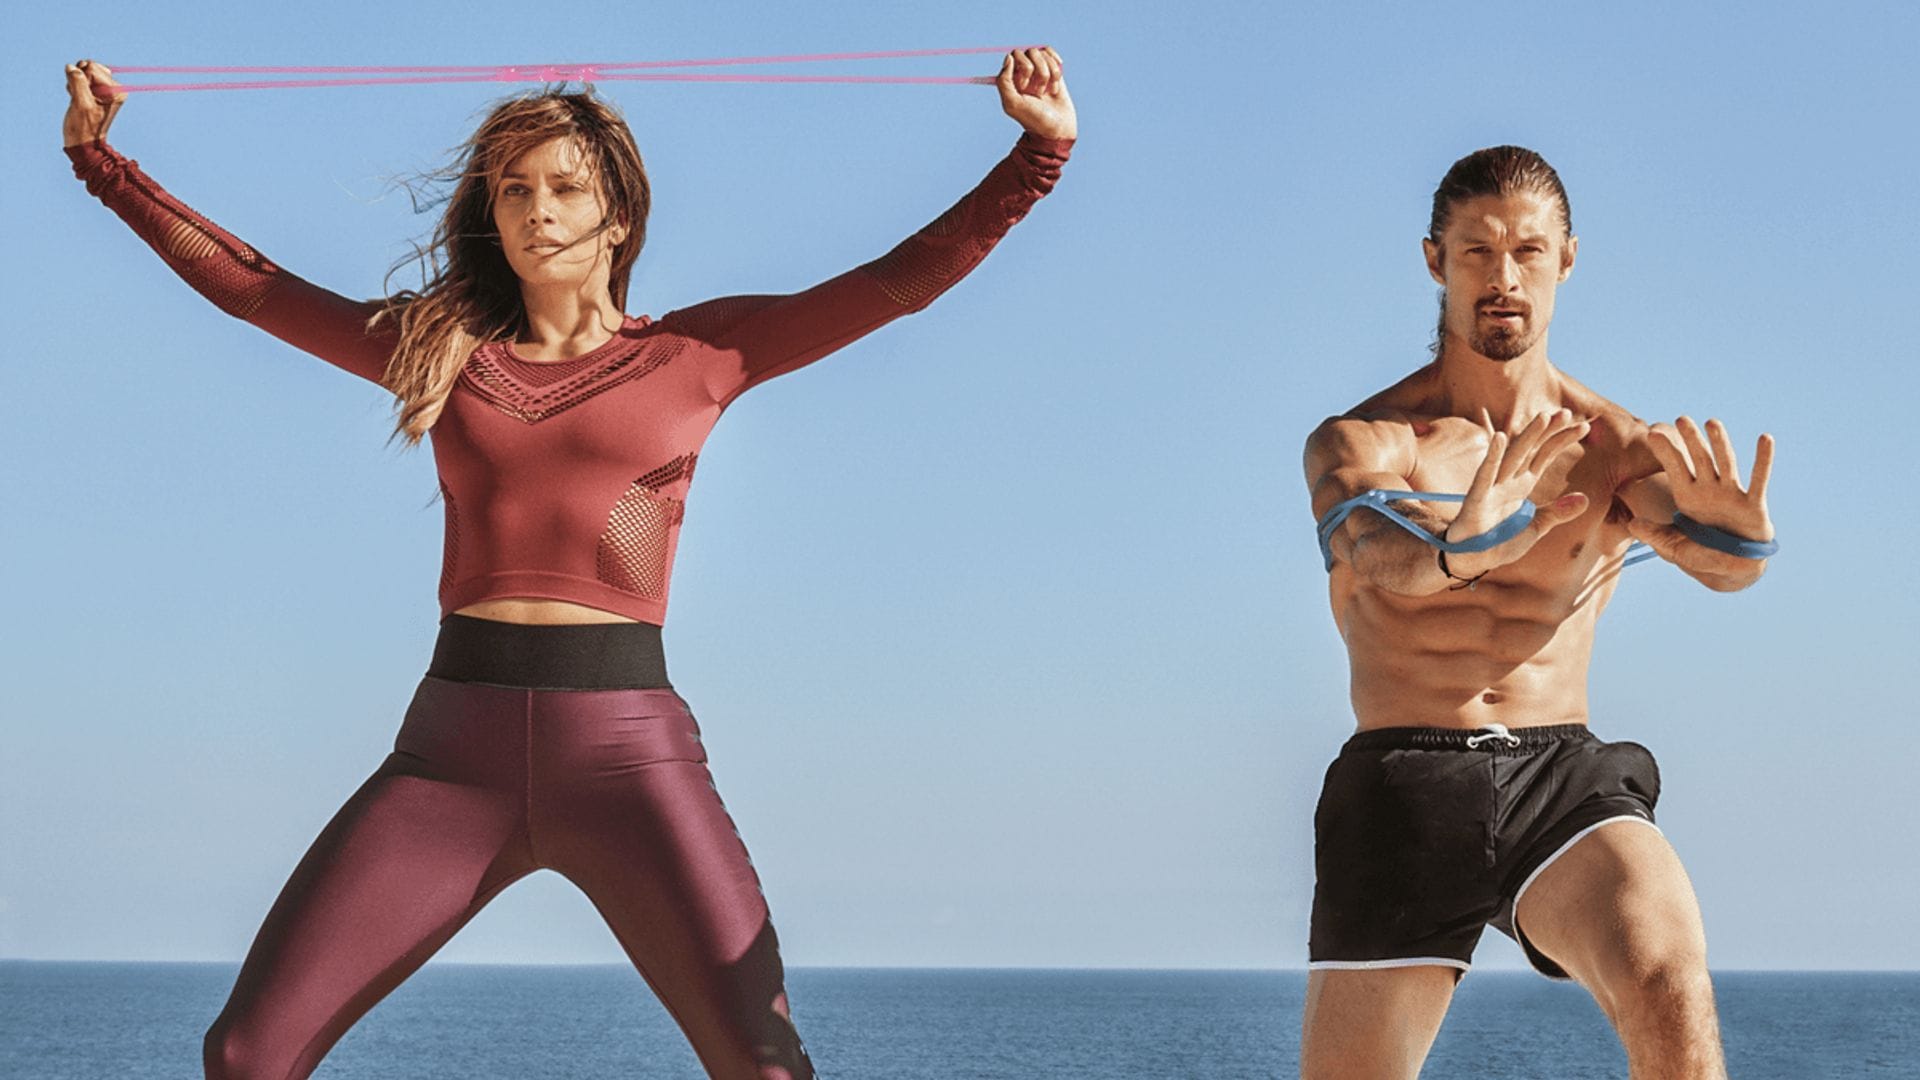 You can now workout with Halle Berry and her trainer for free